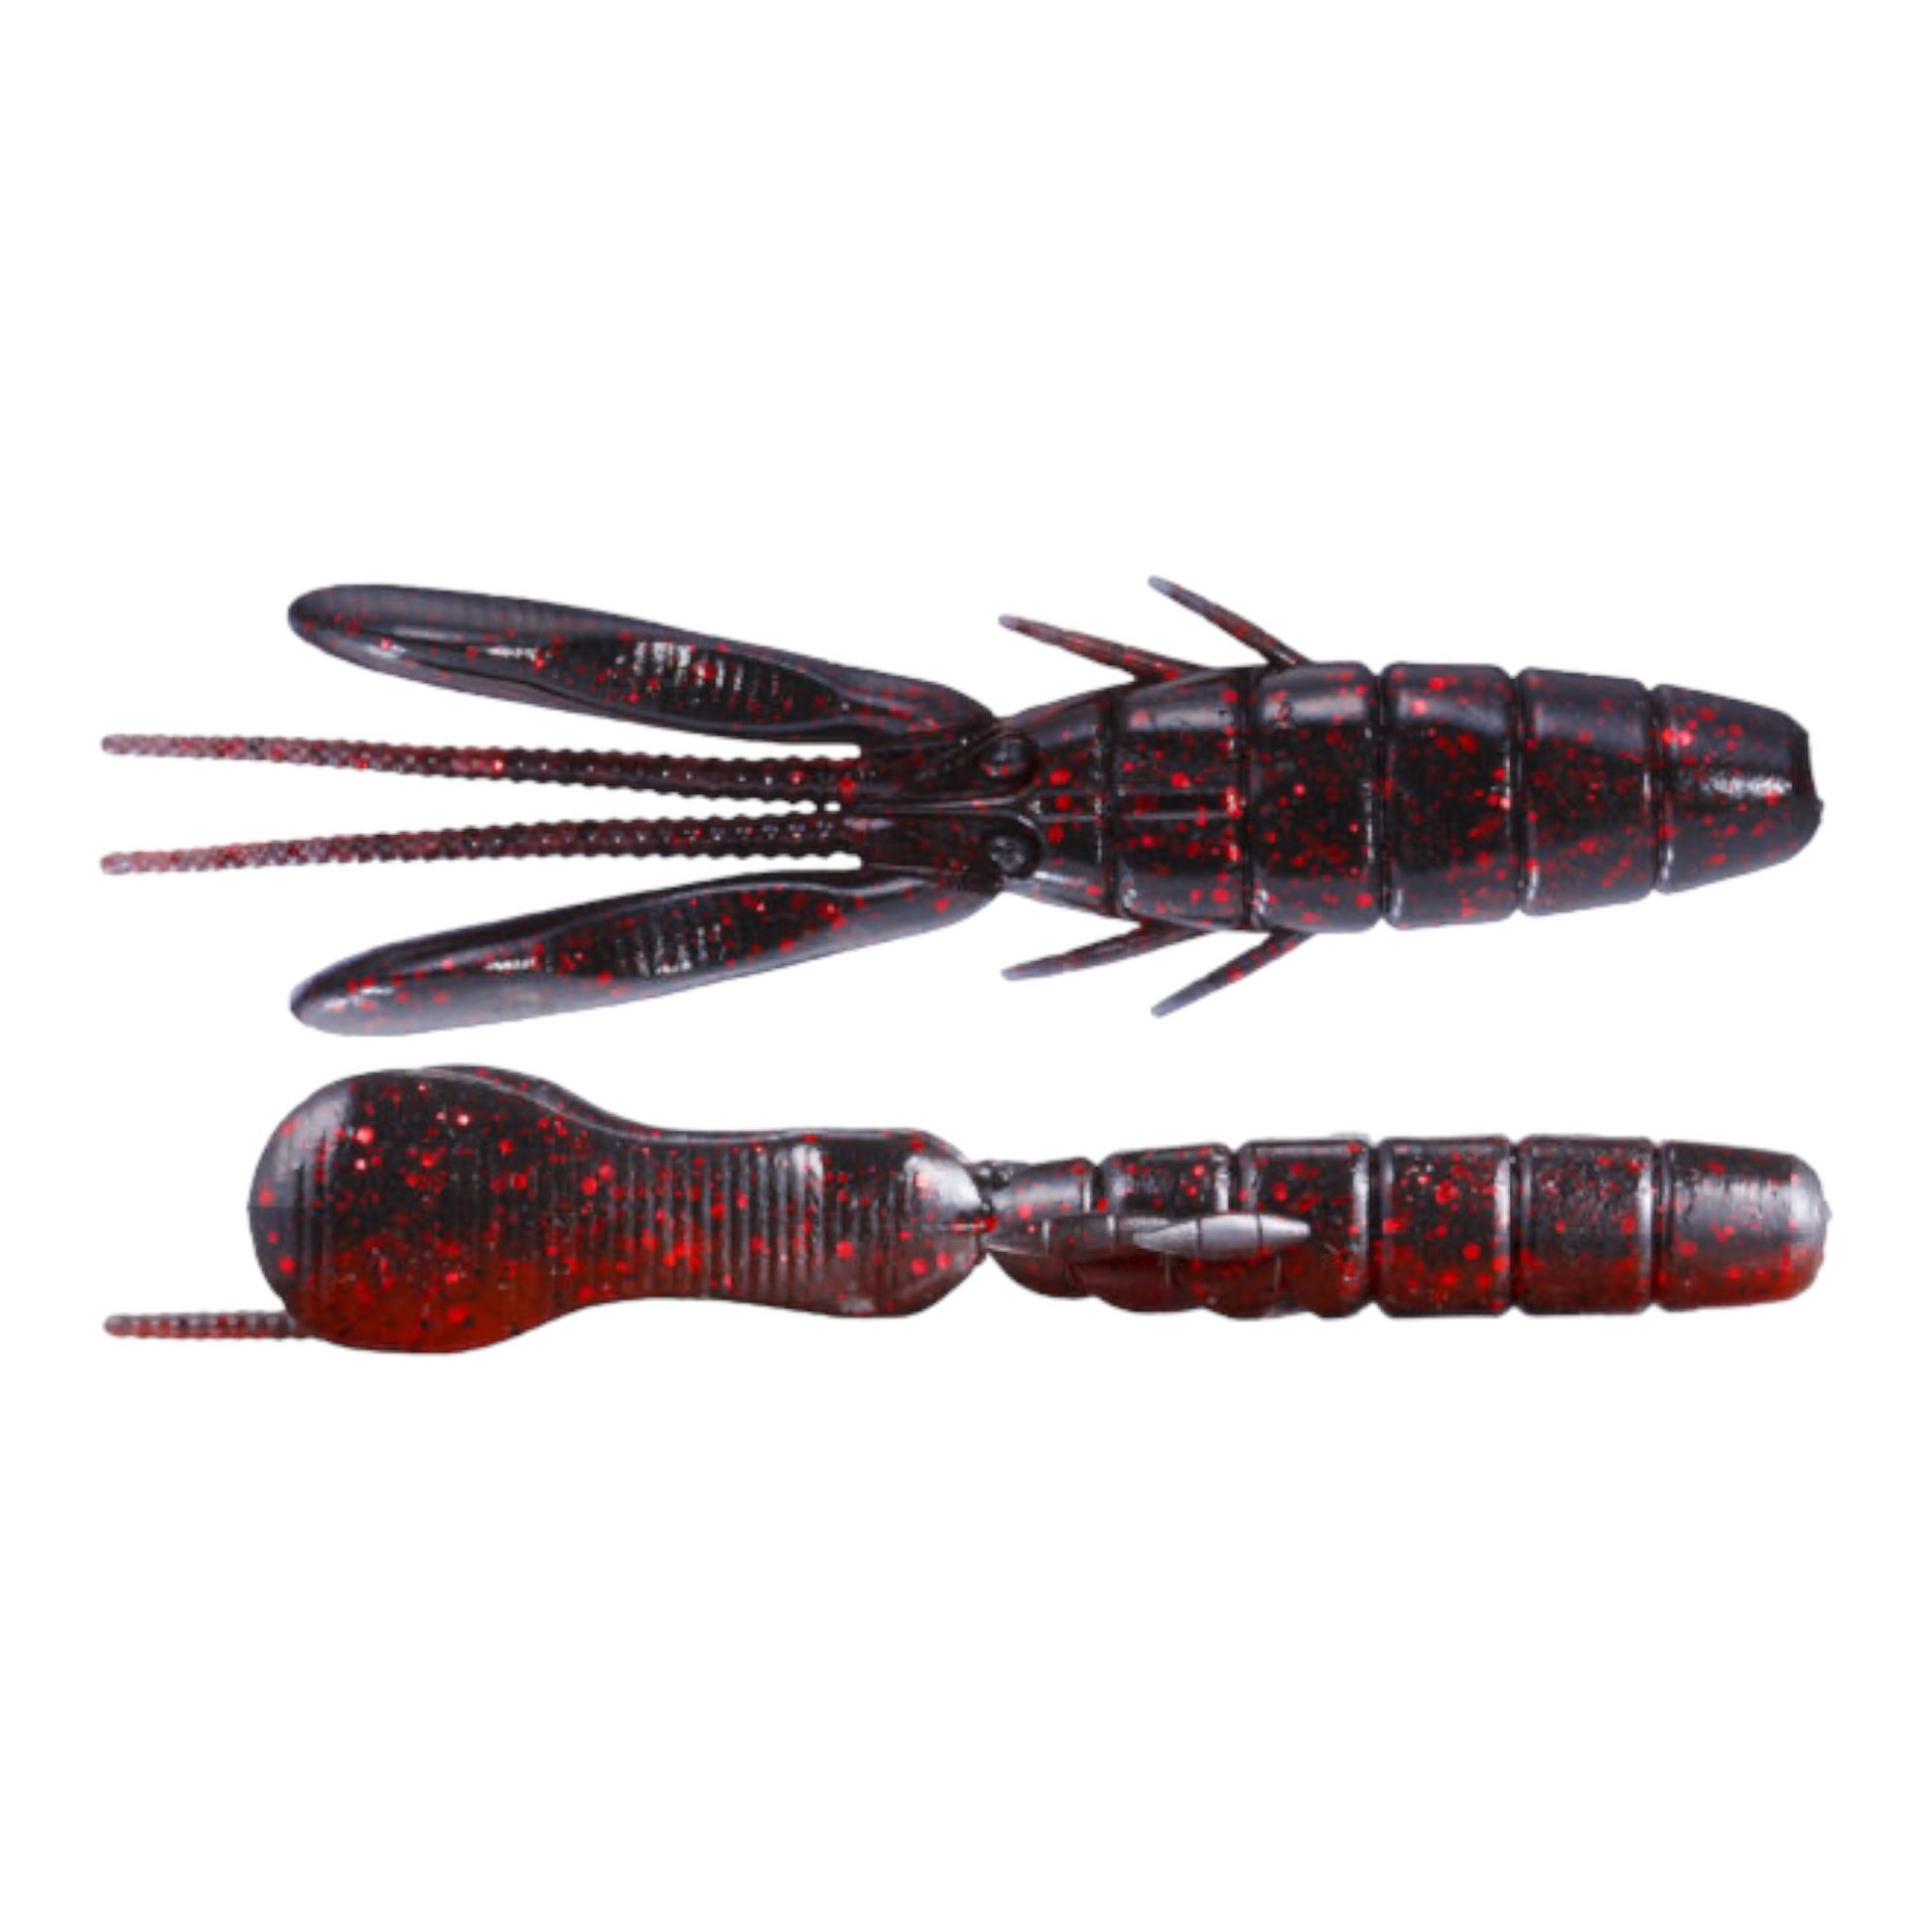 OSP Dolive Beaver Creature Bait 4 – Three Rivers Tackle